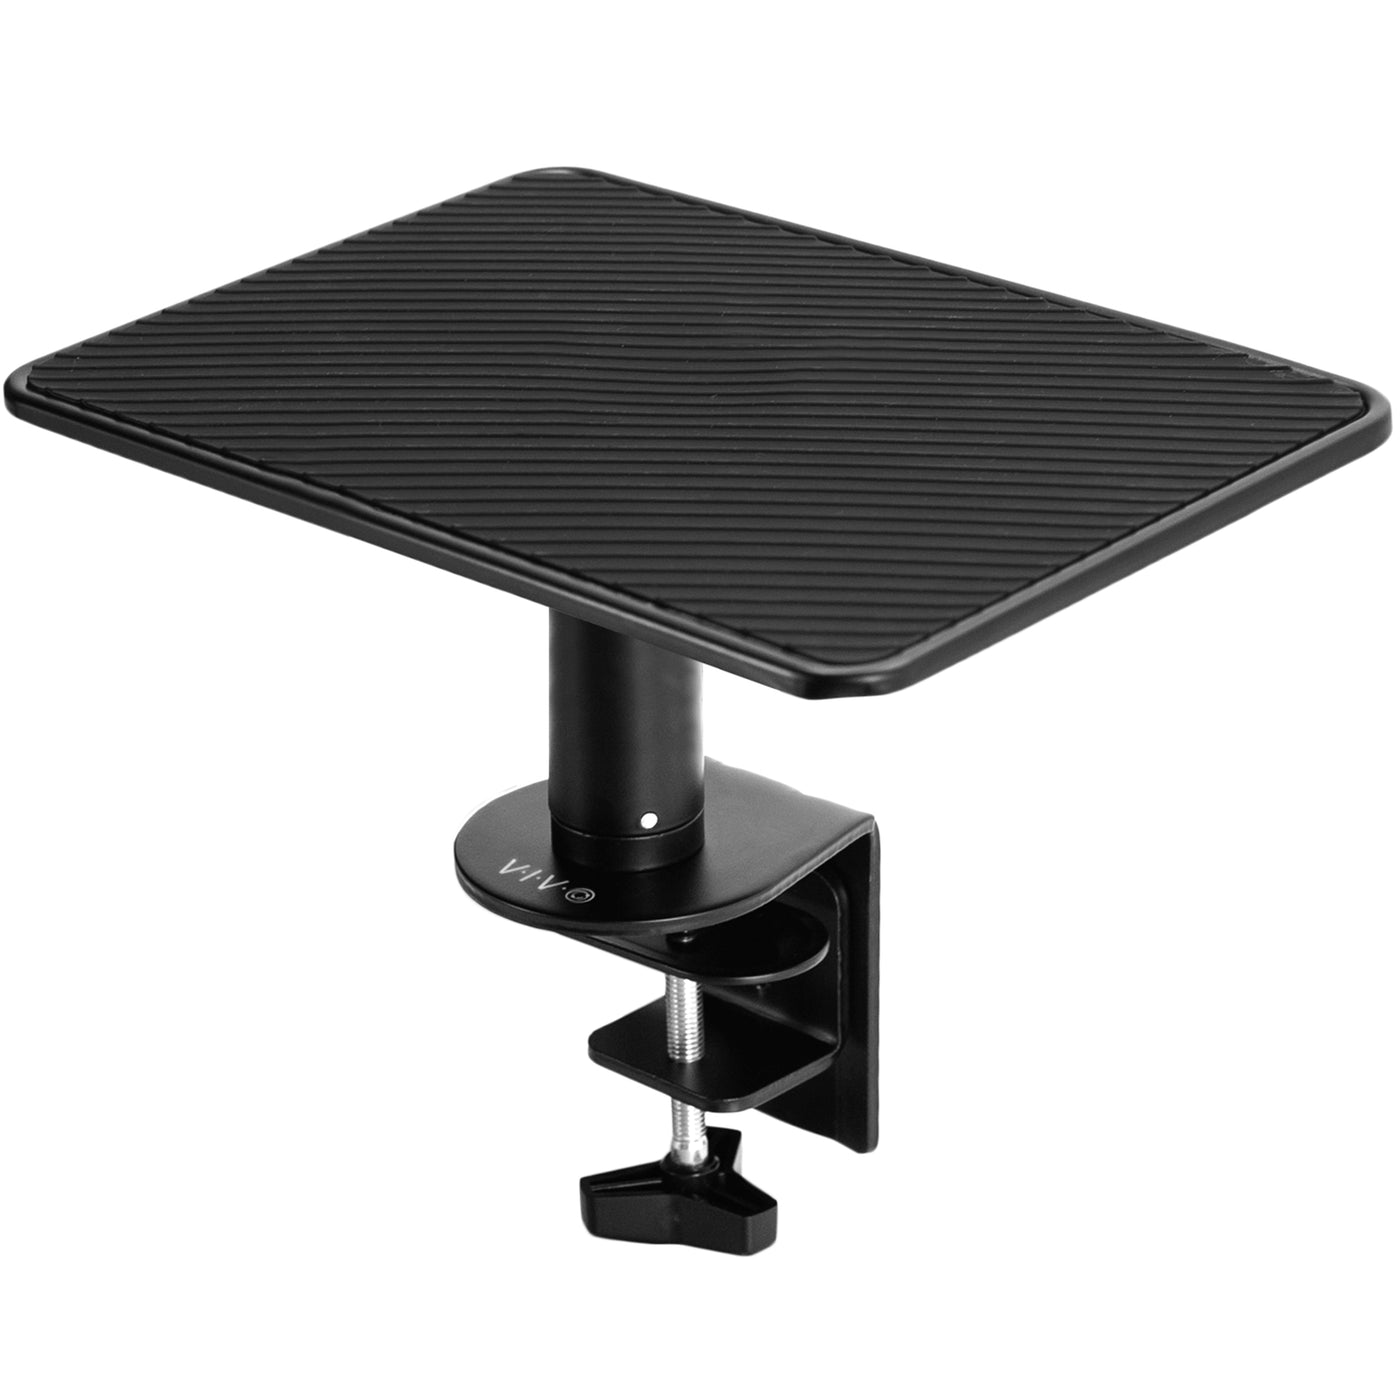 Secure clamp-on desk mount riser for laptop or monitor that provides ergonomic viewing and reduces strain.